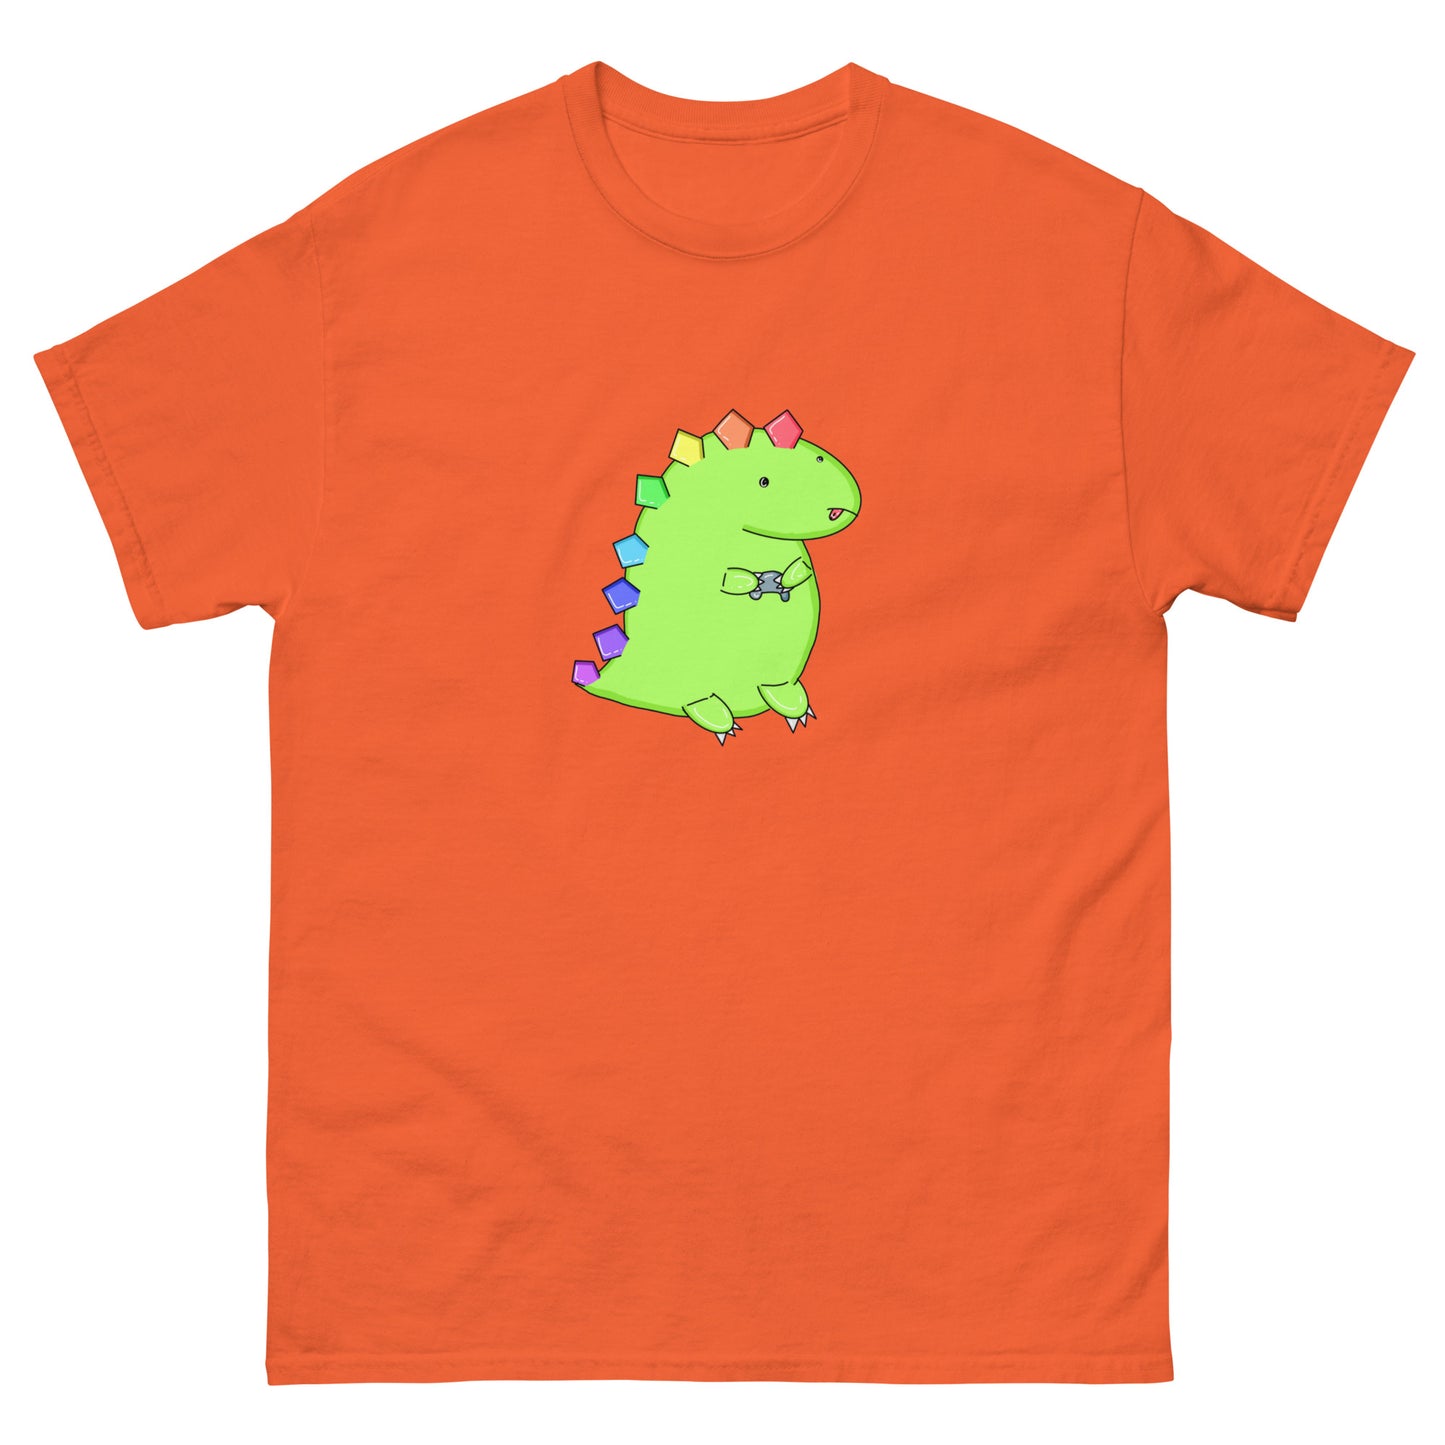 Gaming Dino Tee - ADULT SIZES - Designed Exclusively for Virtual Legality by the Littlest Hoegling